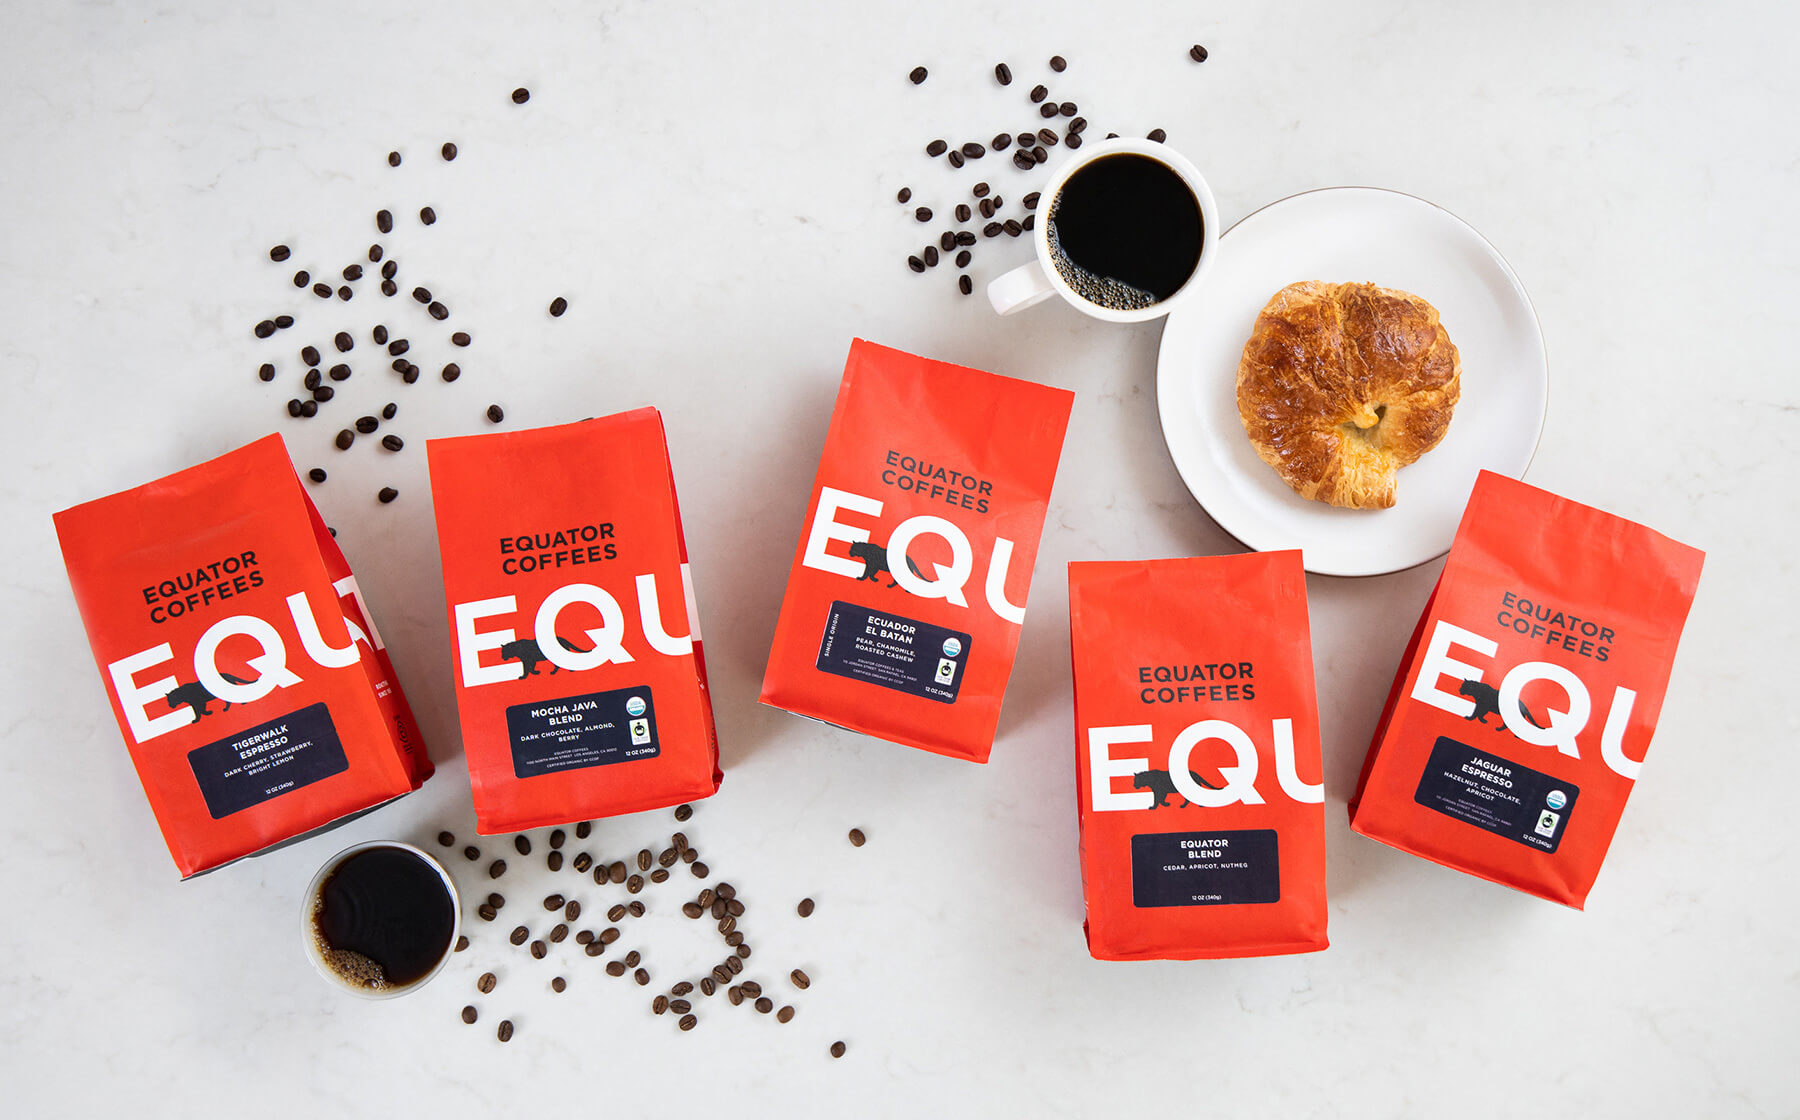 Find out how Equator Coffees achieved 372% subscription growth by switching to Ordergroove Featured Image